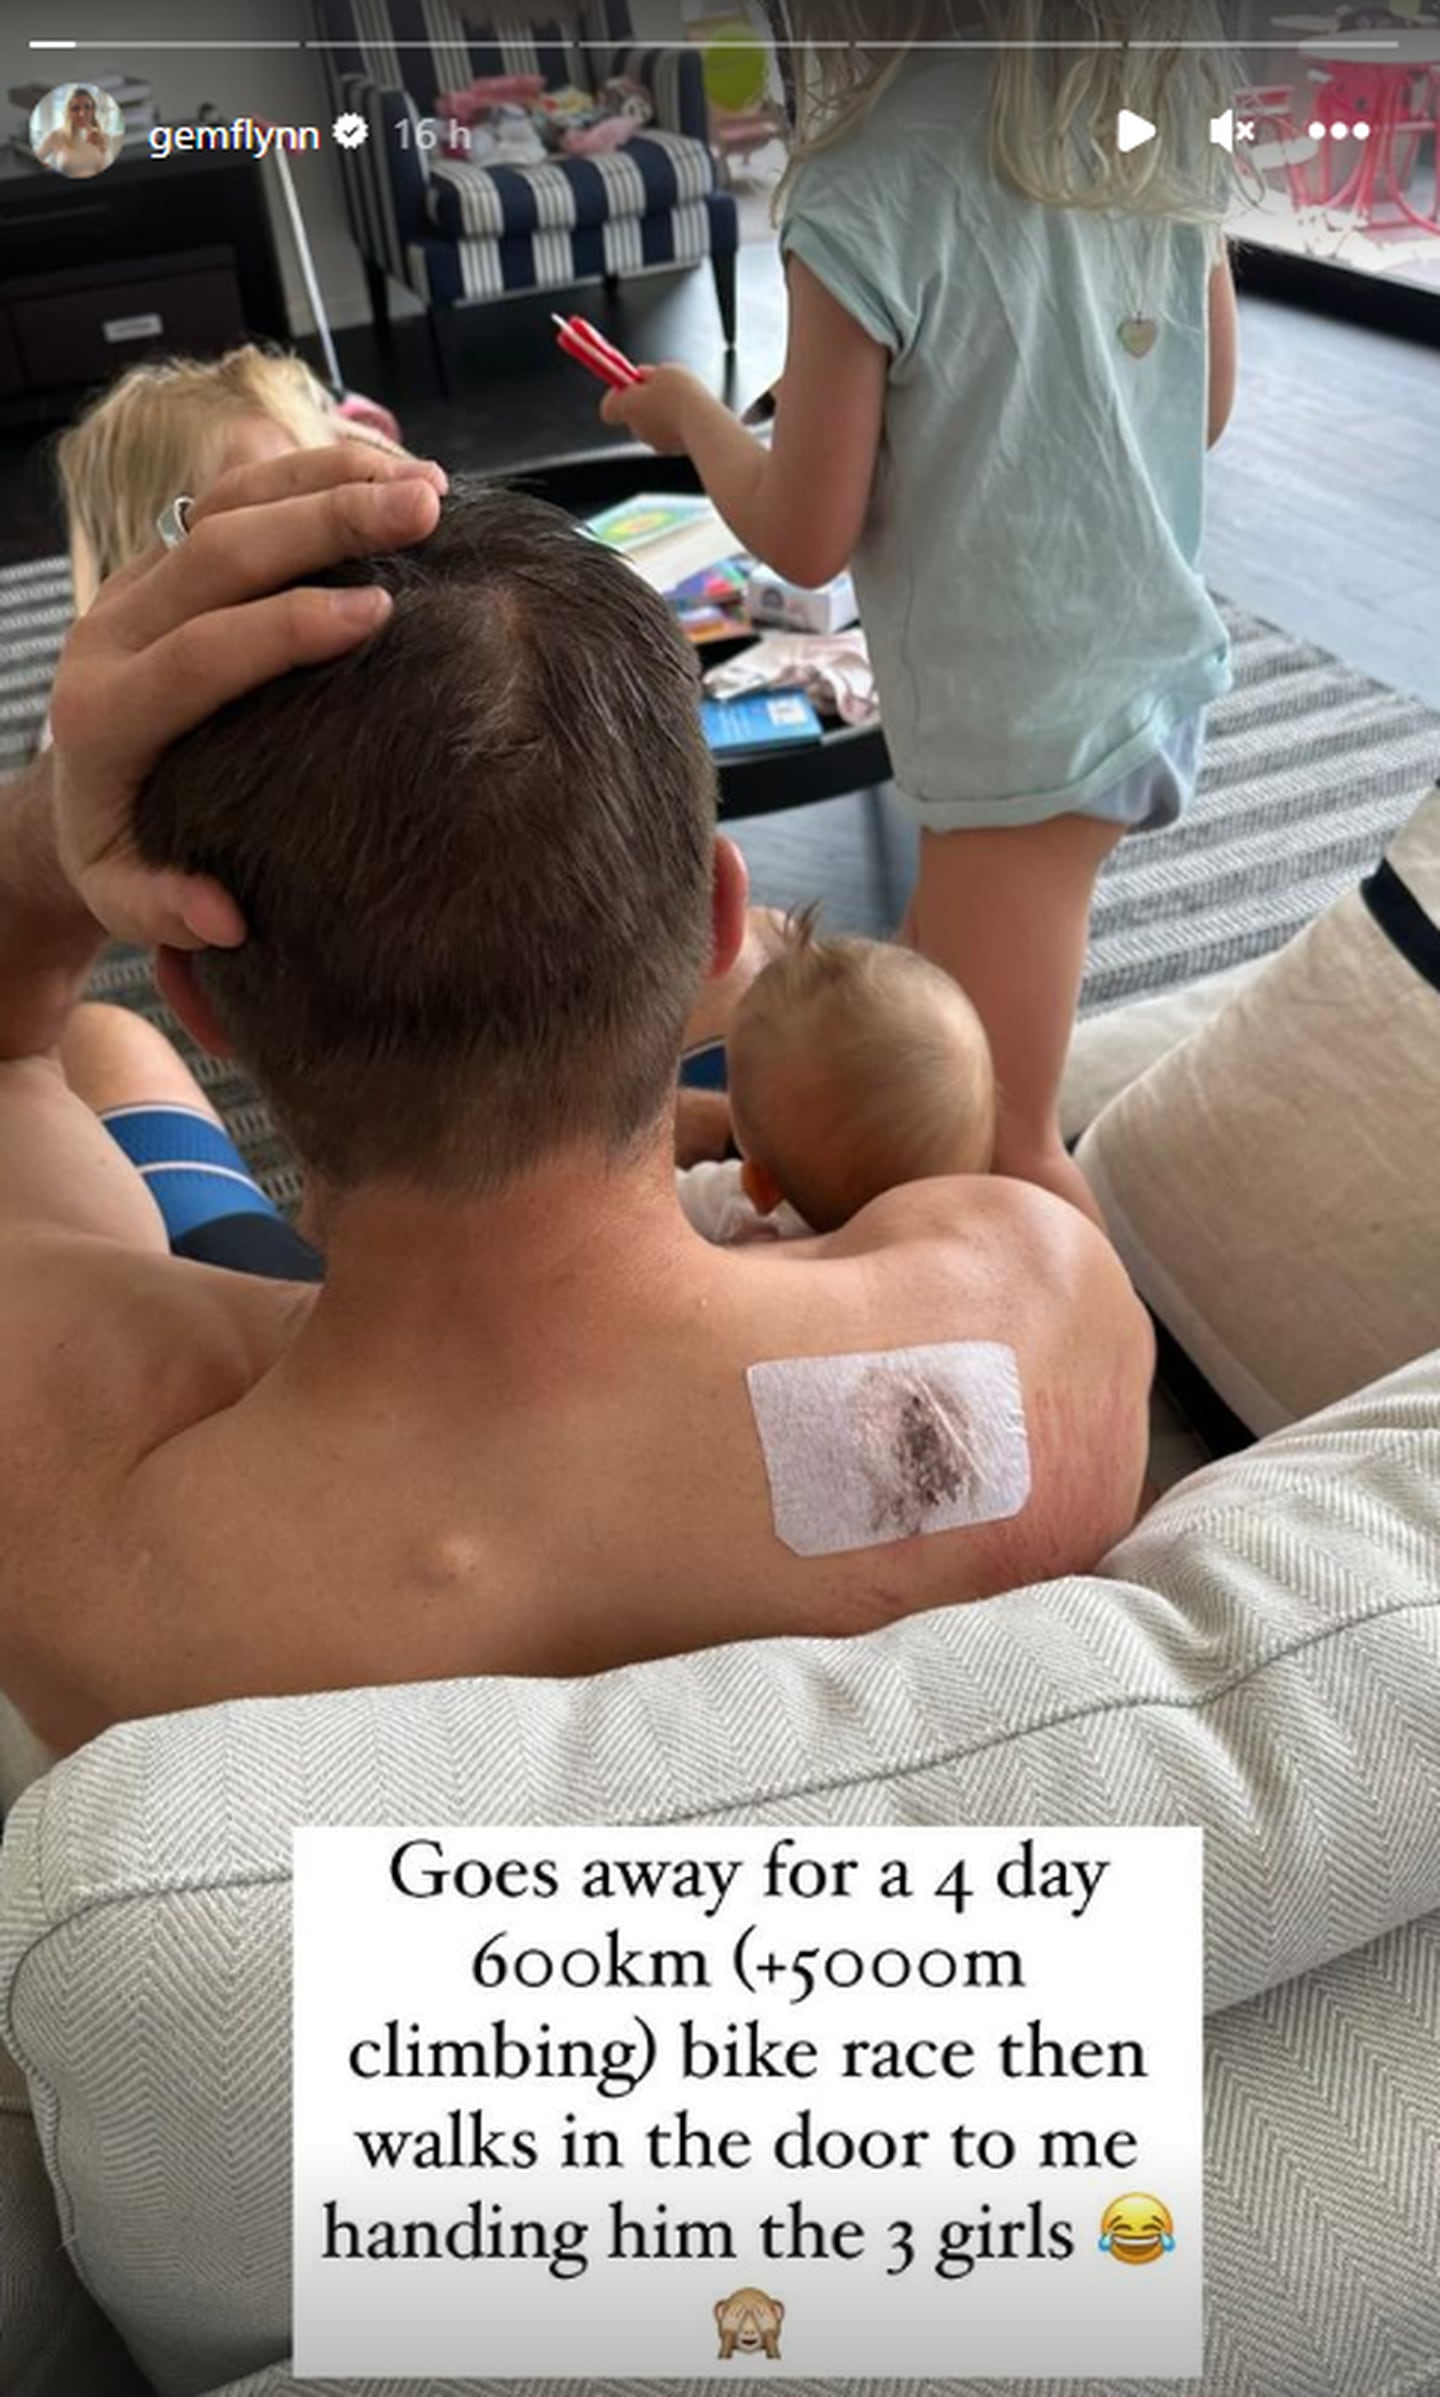 No rest for the wicked as Richie McCaw is straight back into parenting duties despite his apparent fall. Photo / Instagram, @gemflynn